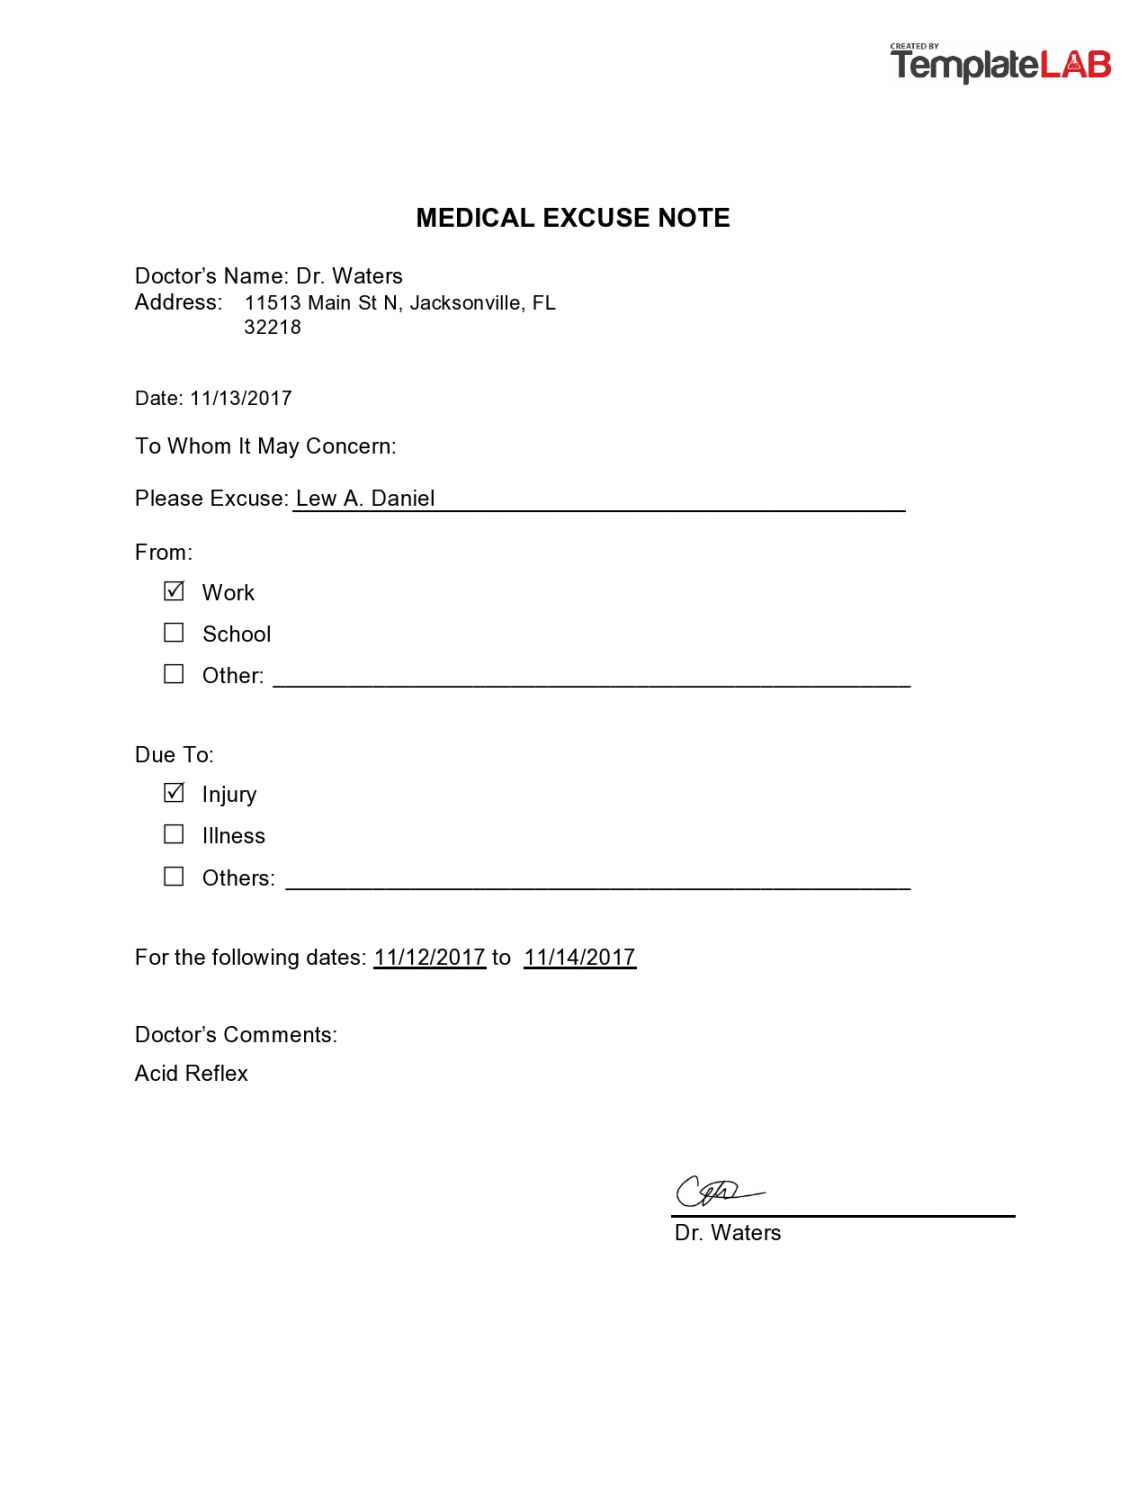 Free Printable Doctors Note For Work - Printable -  Free Doctor Note Templates [for Work or School]